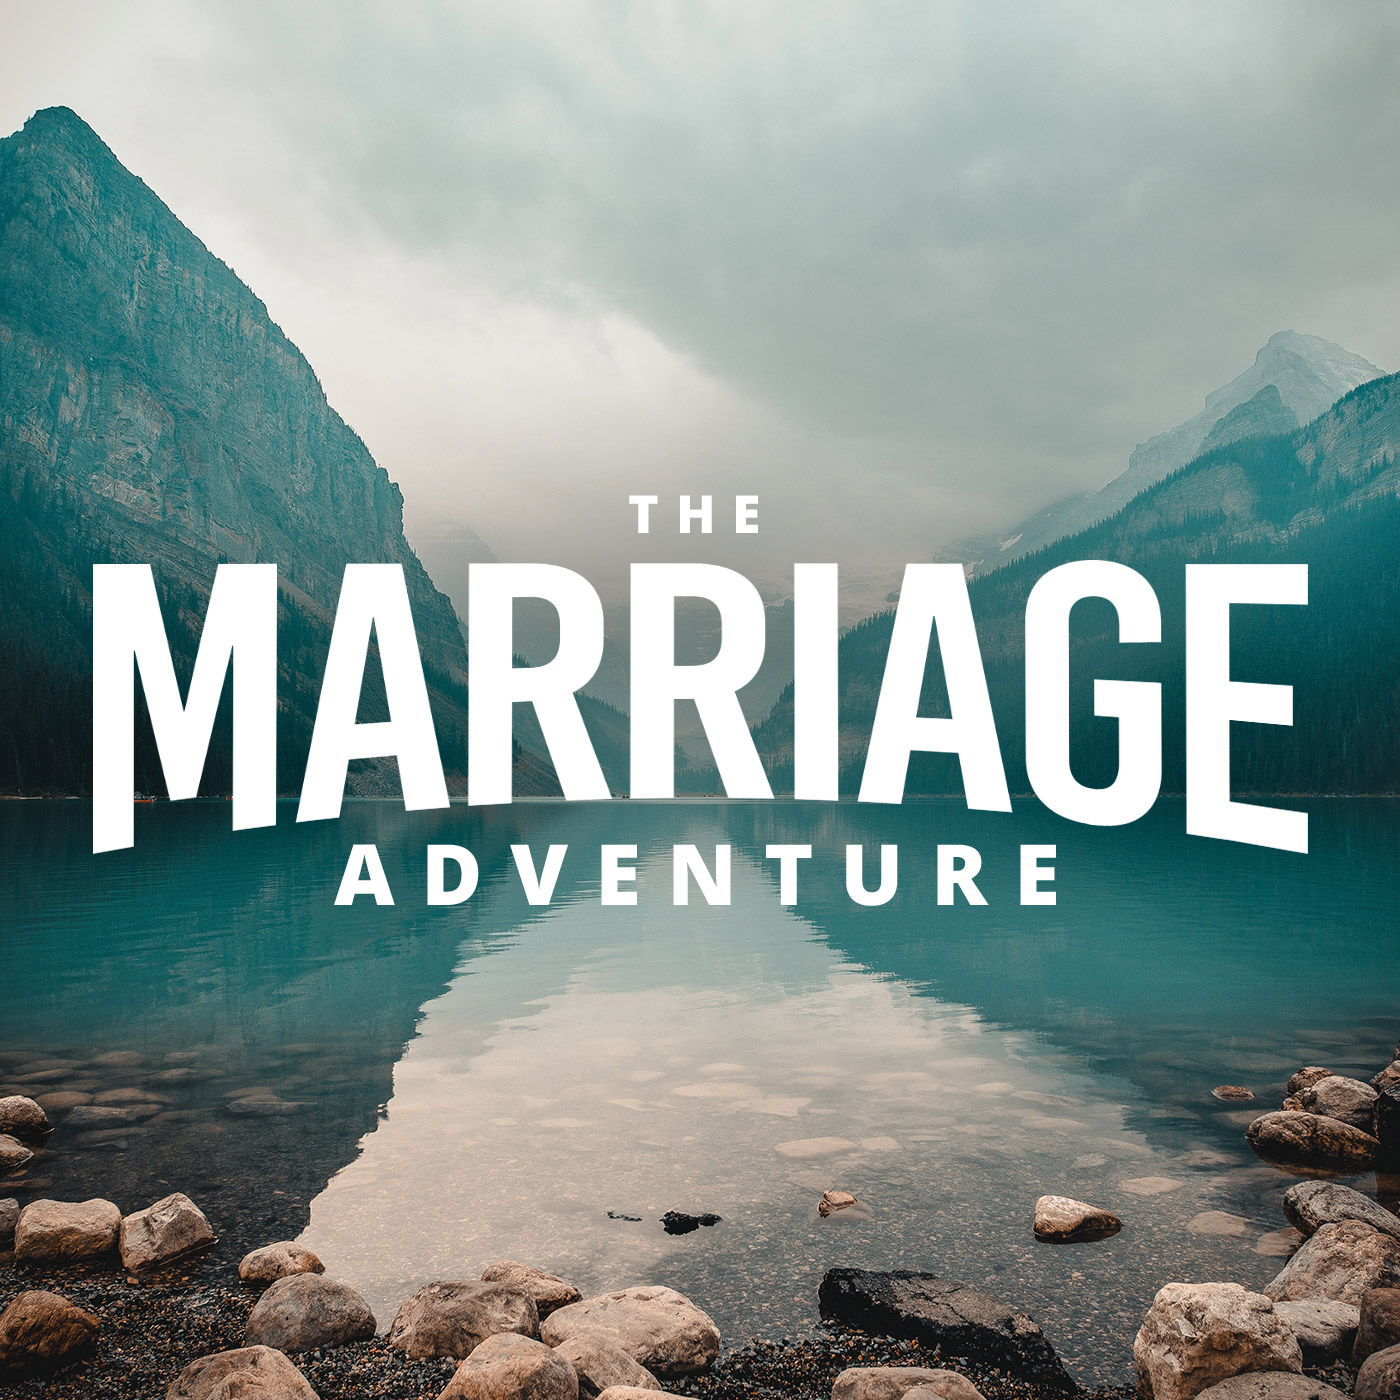 The Marriage Adventure – Join the Adventure!